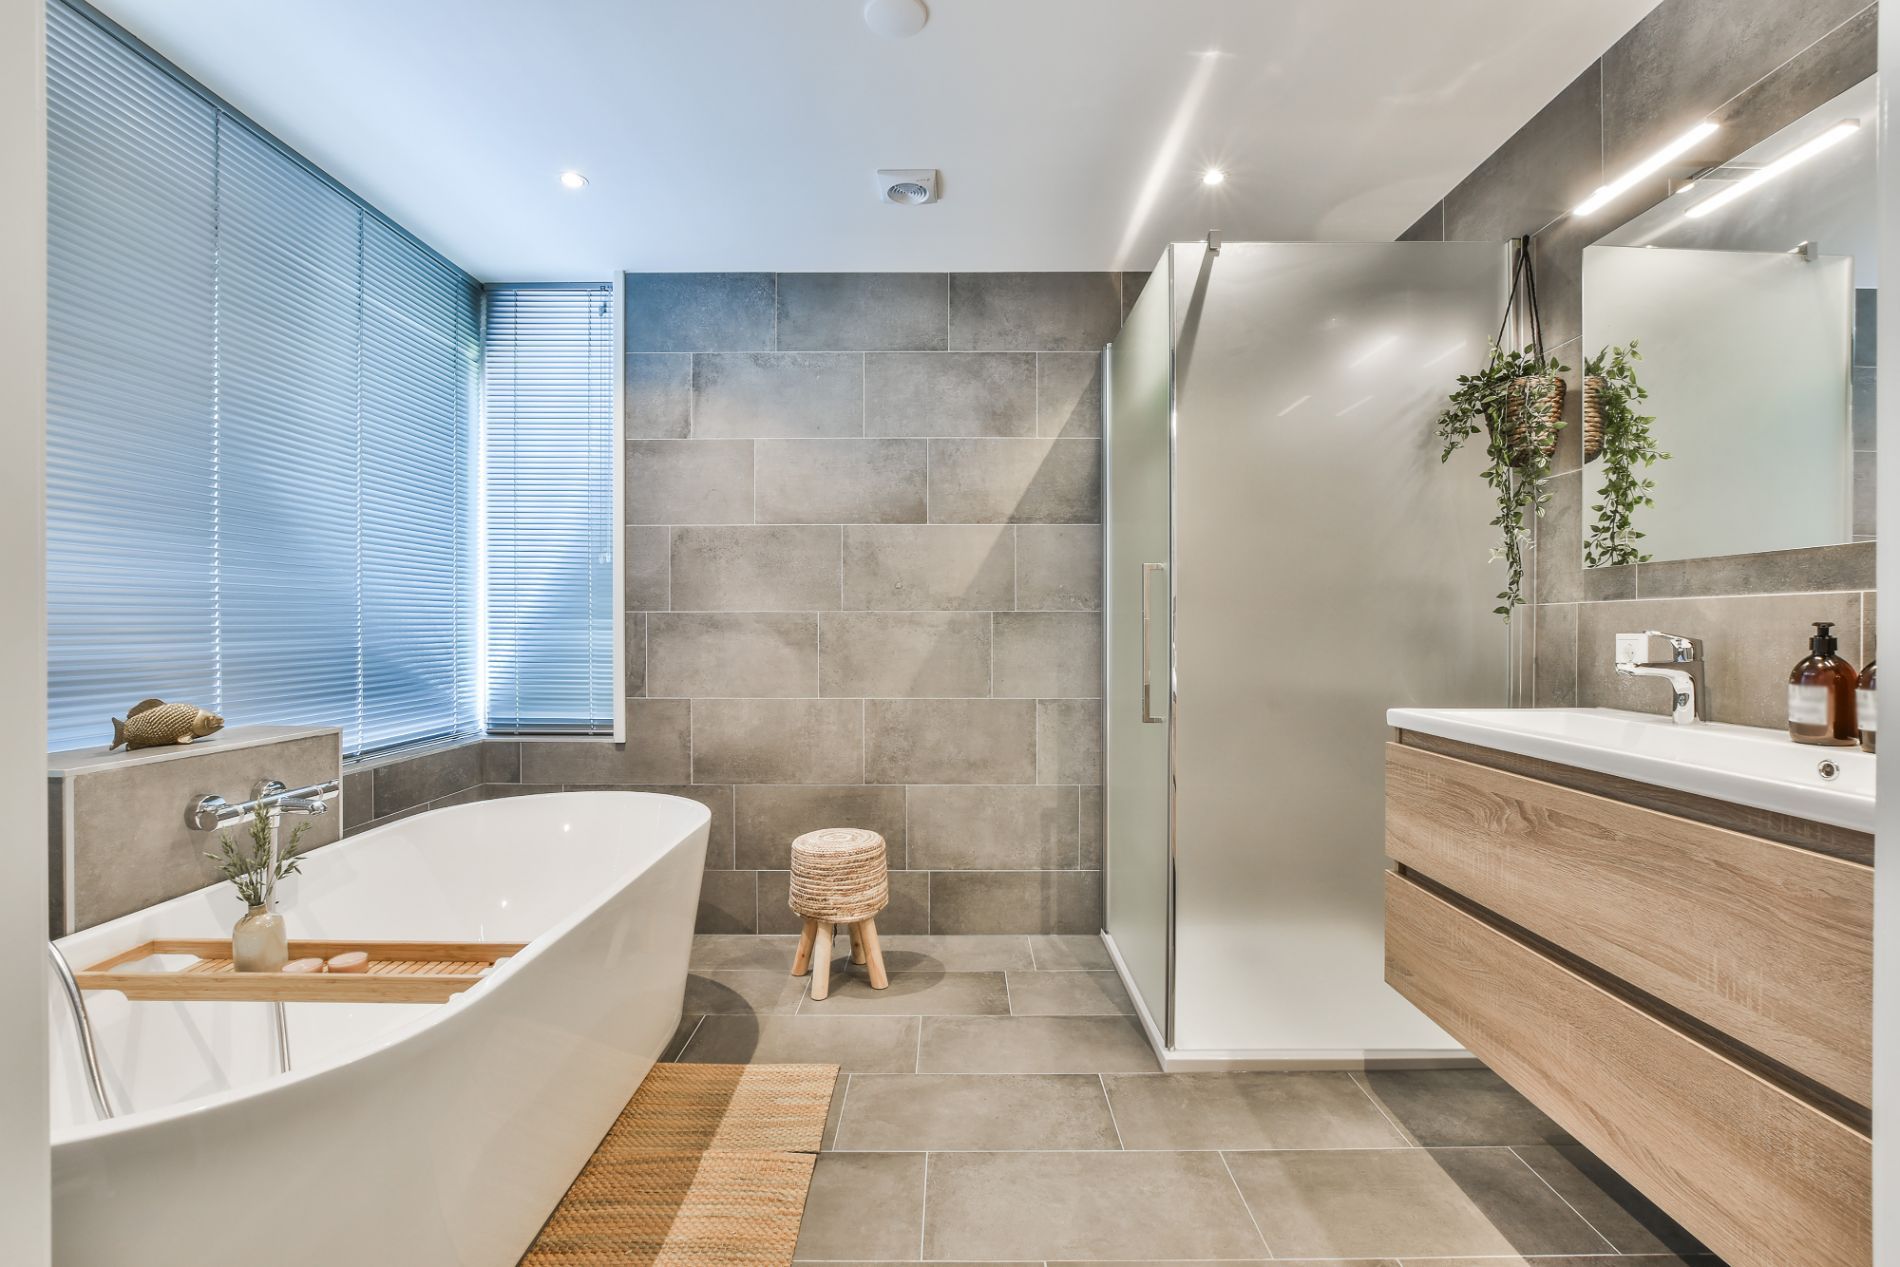 A bright and modern bathroom with a large bathtub, a walk-in shower with a glass door, and a single 